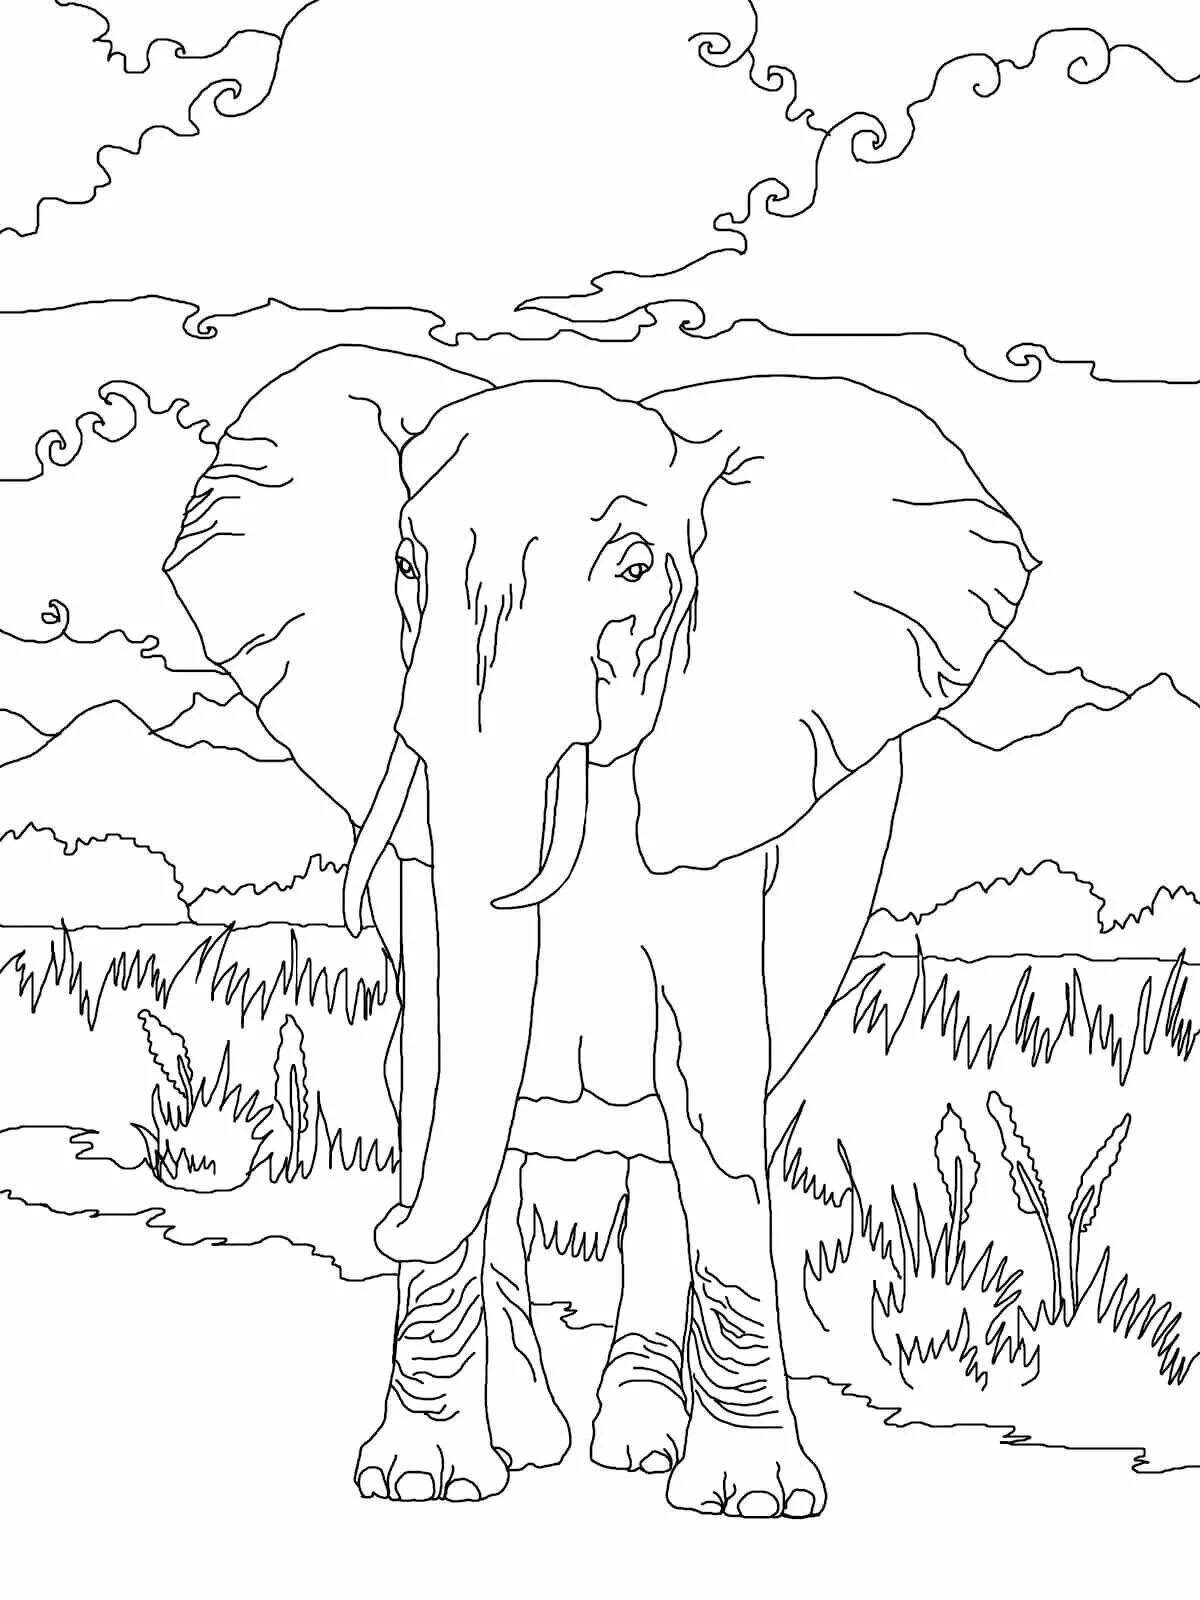 Exquisite African elephant coloring